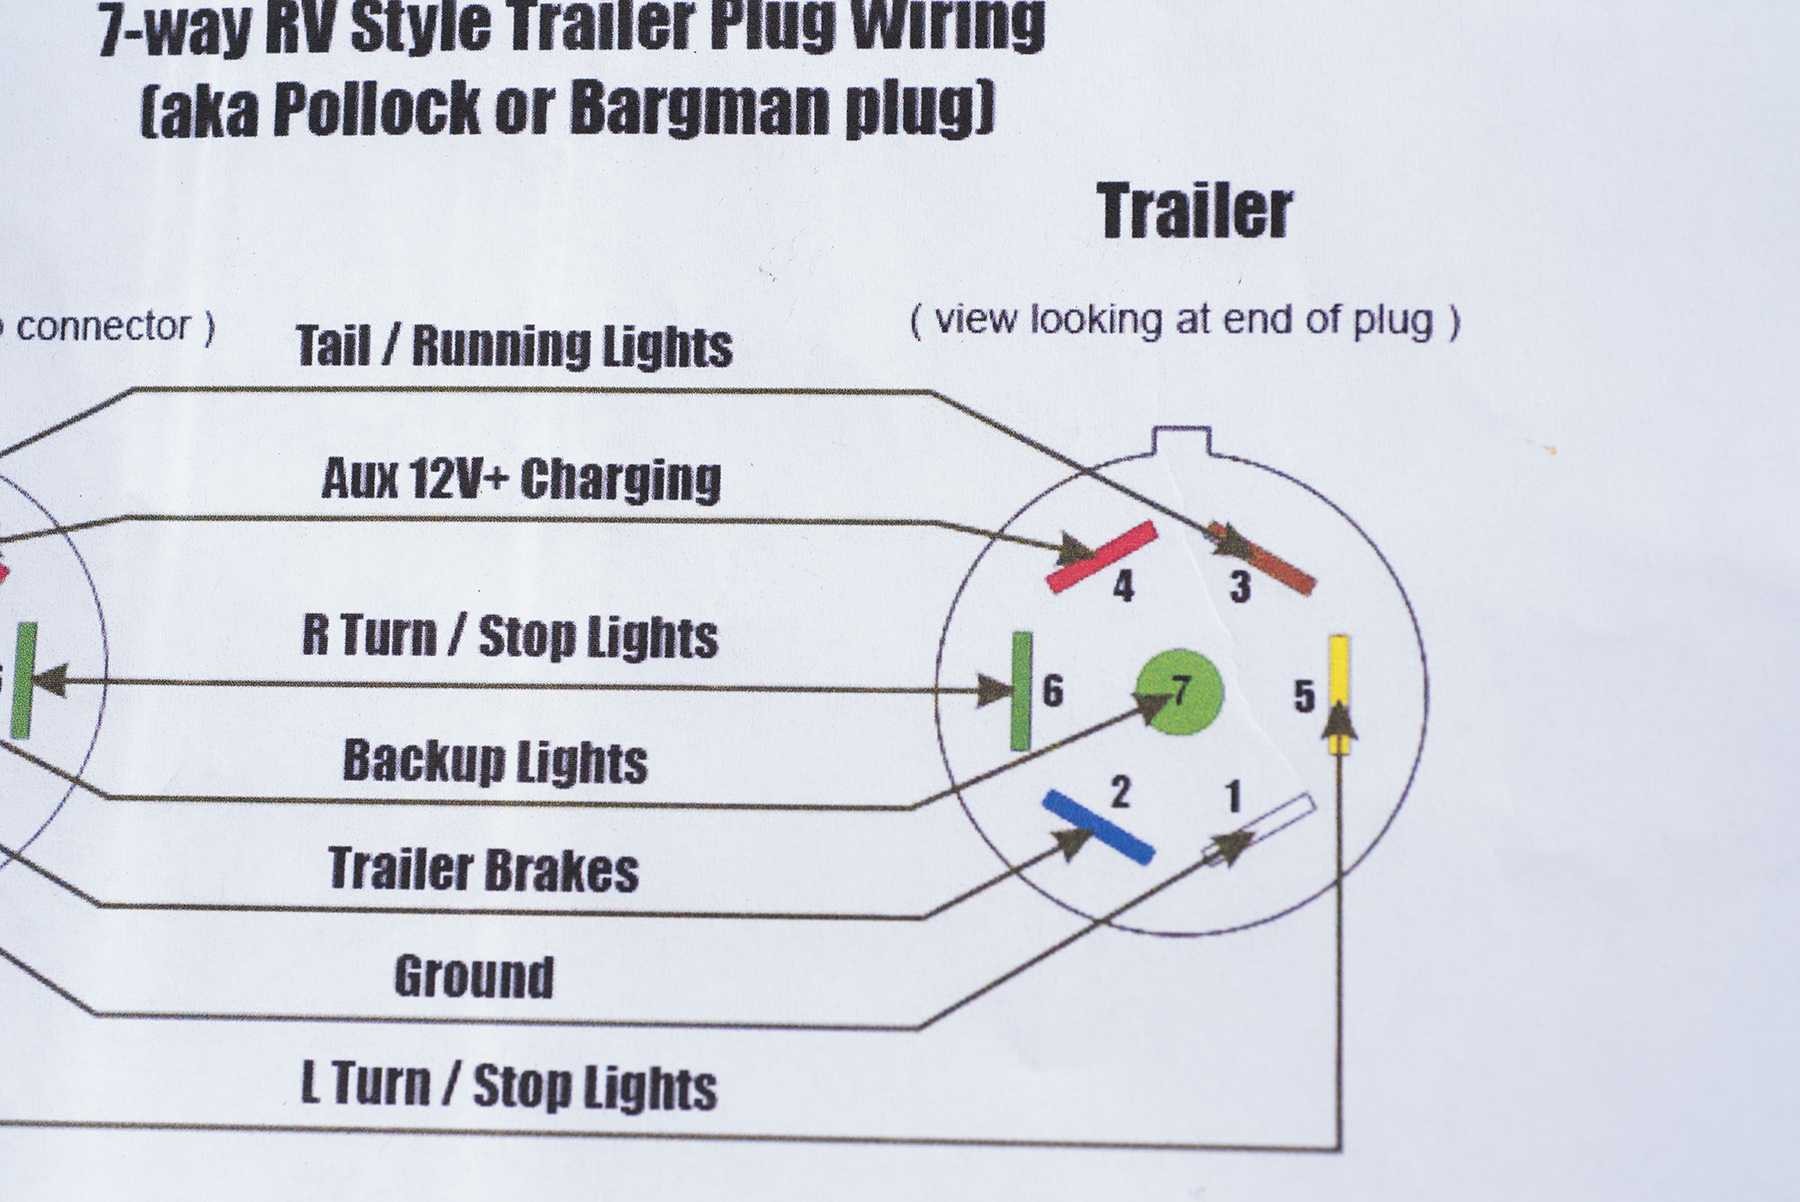 4 Pin Trailer Connector Wiring Diagram 7 Wire Trailer Plug Diagram Wiring Diagram Tearing In Wiring Afif Of 4 Pin Trailer Connector Wiring Diagram